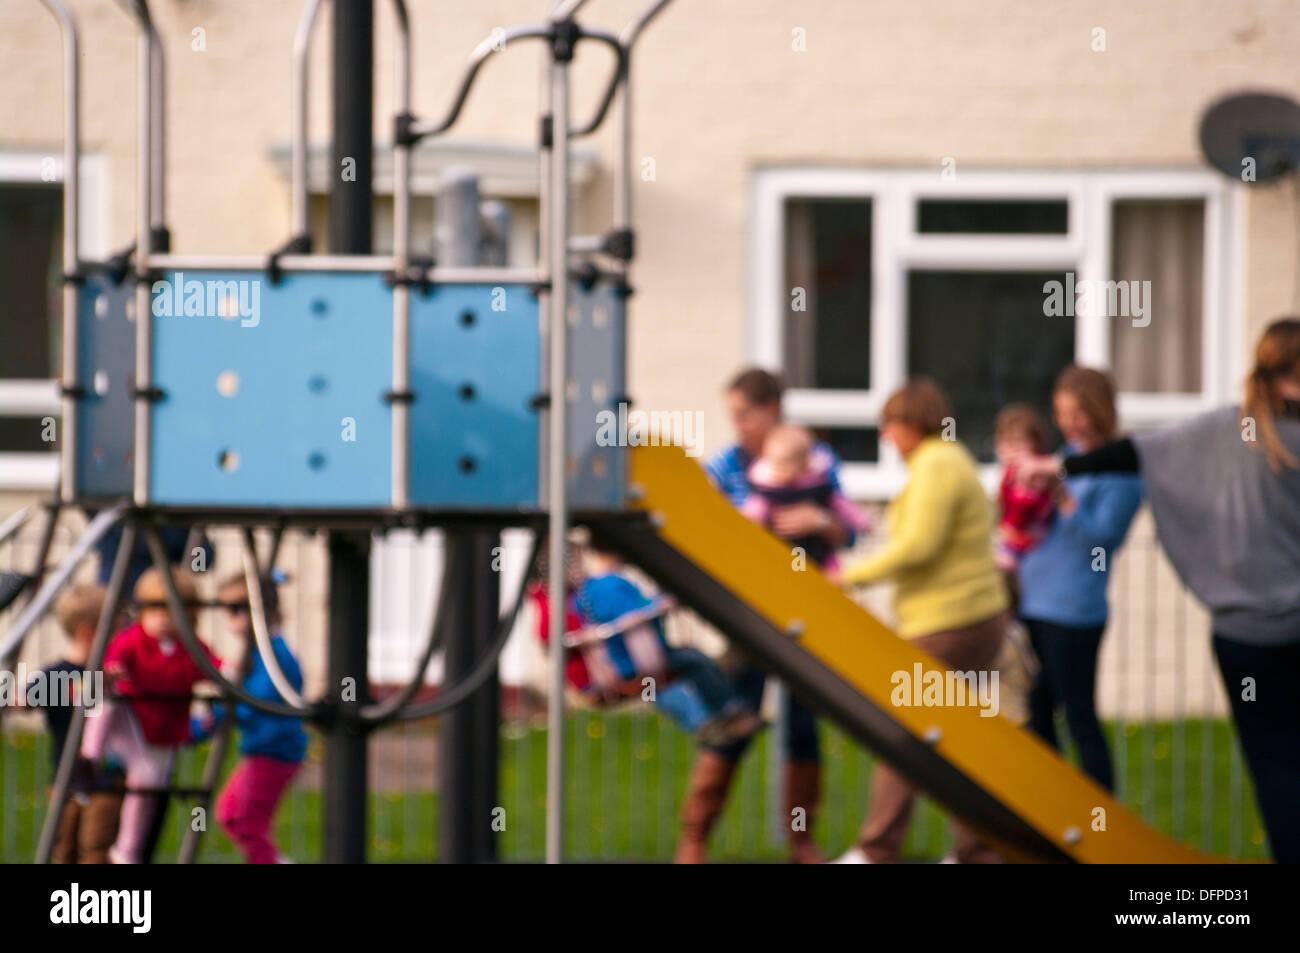 parents and children at a childrens playground (intentionally out of focus to conceal subjects identities) Stock Photo